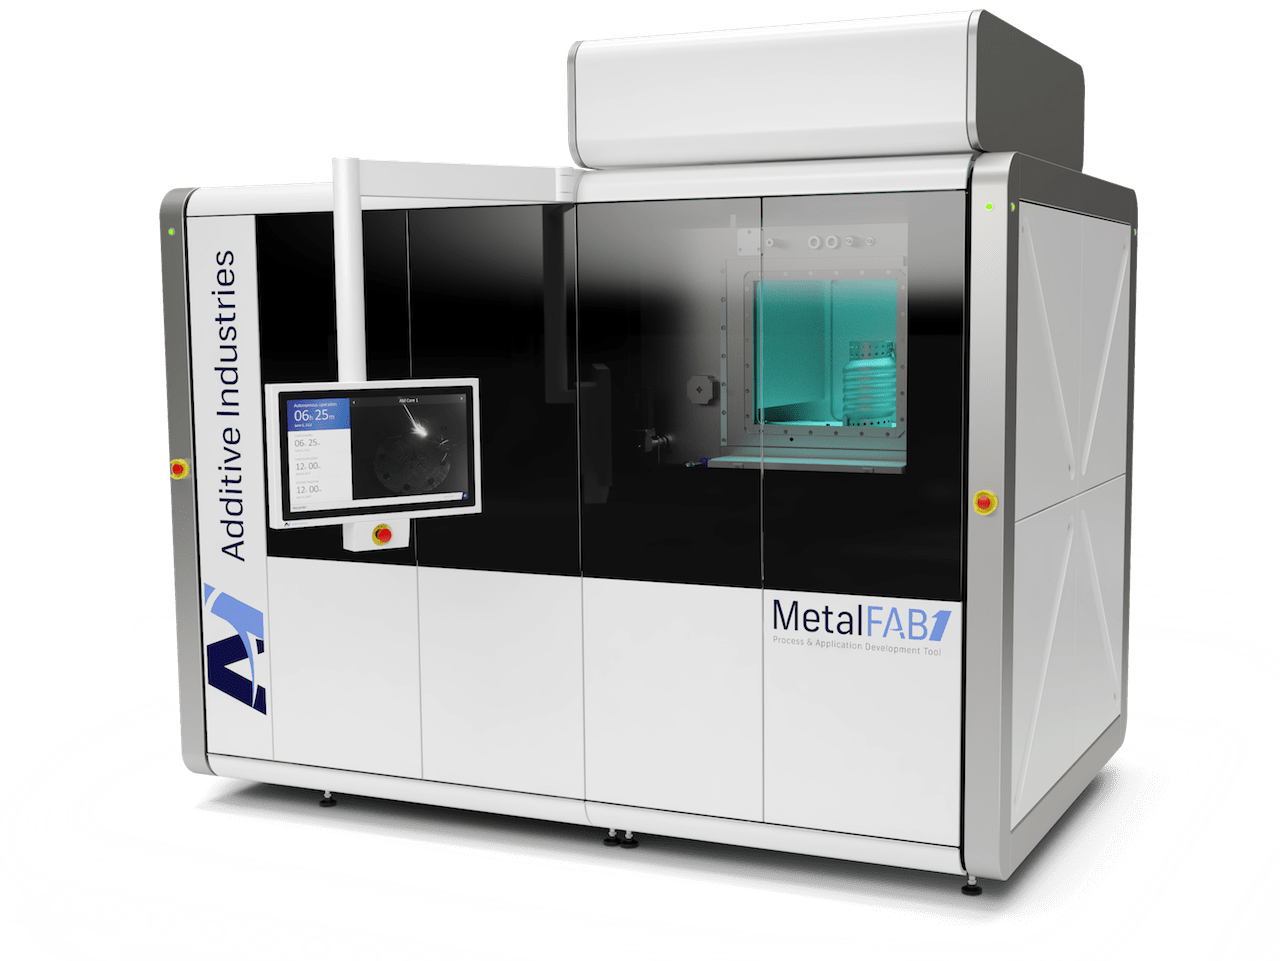  The new MetalFAB1 Process & Application Development Tool from Additive Industries 